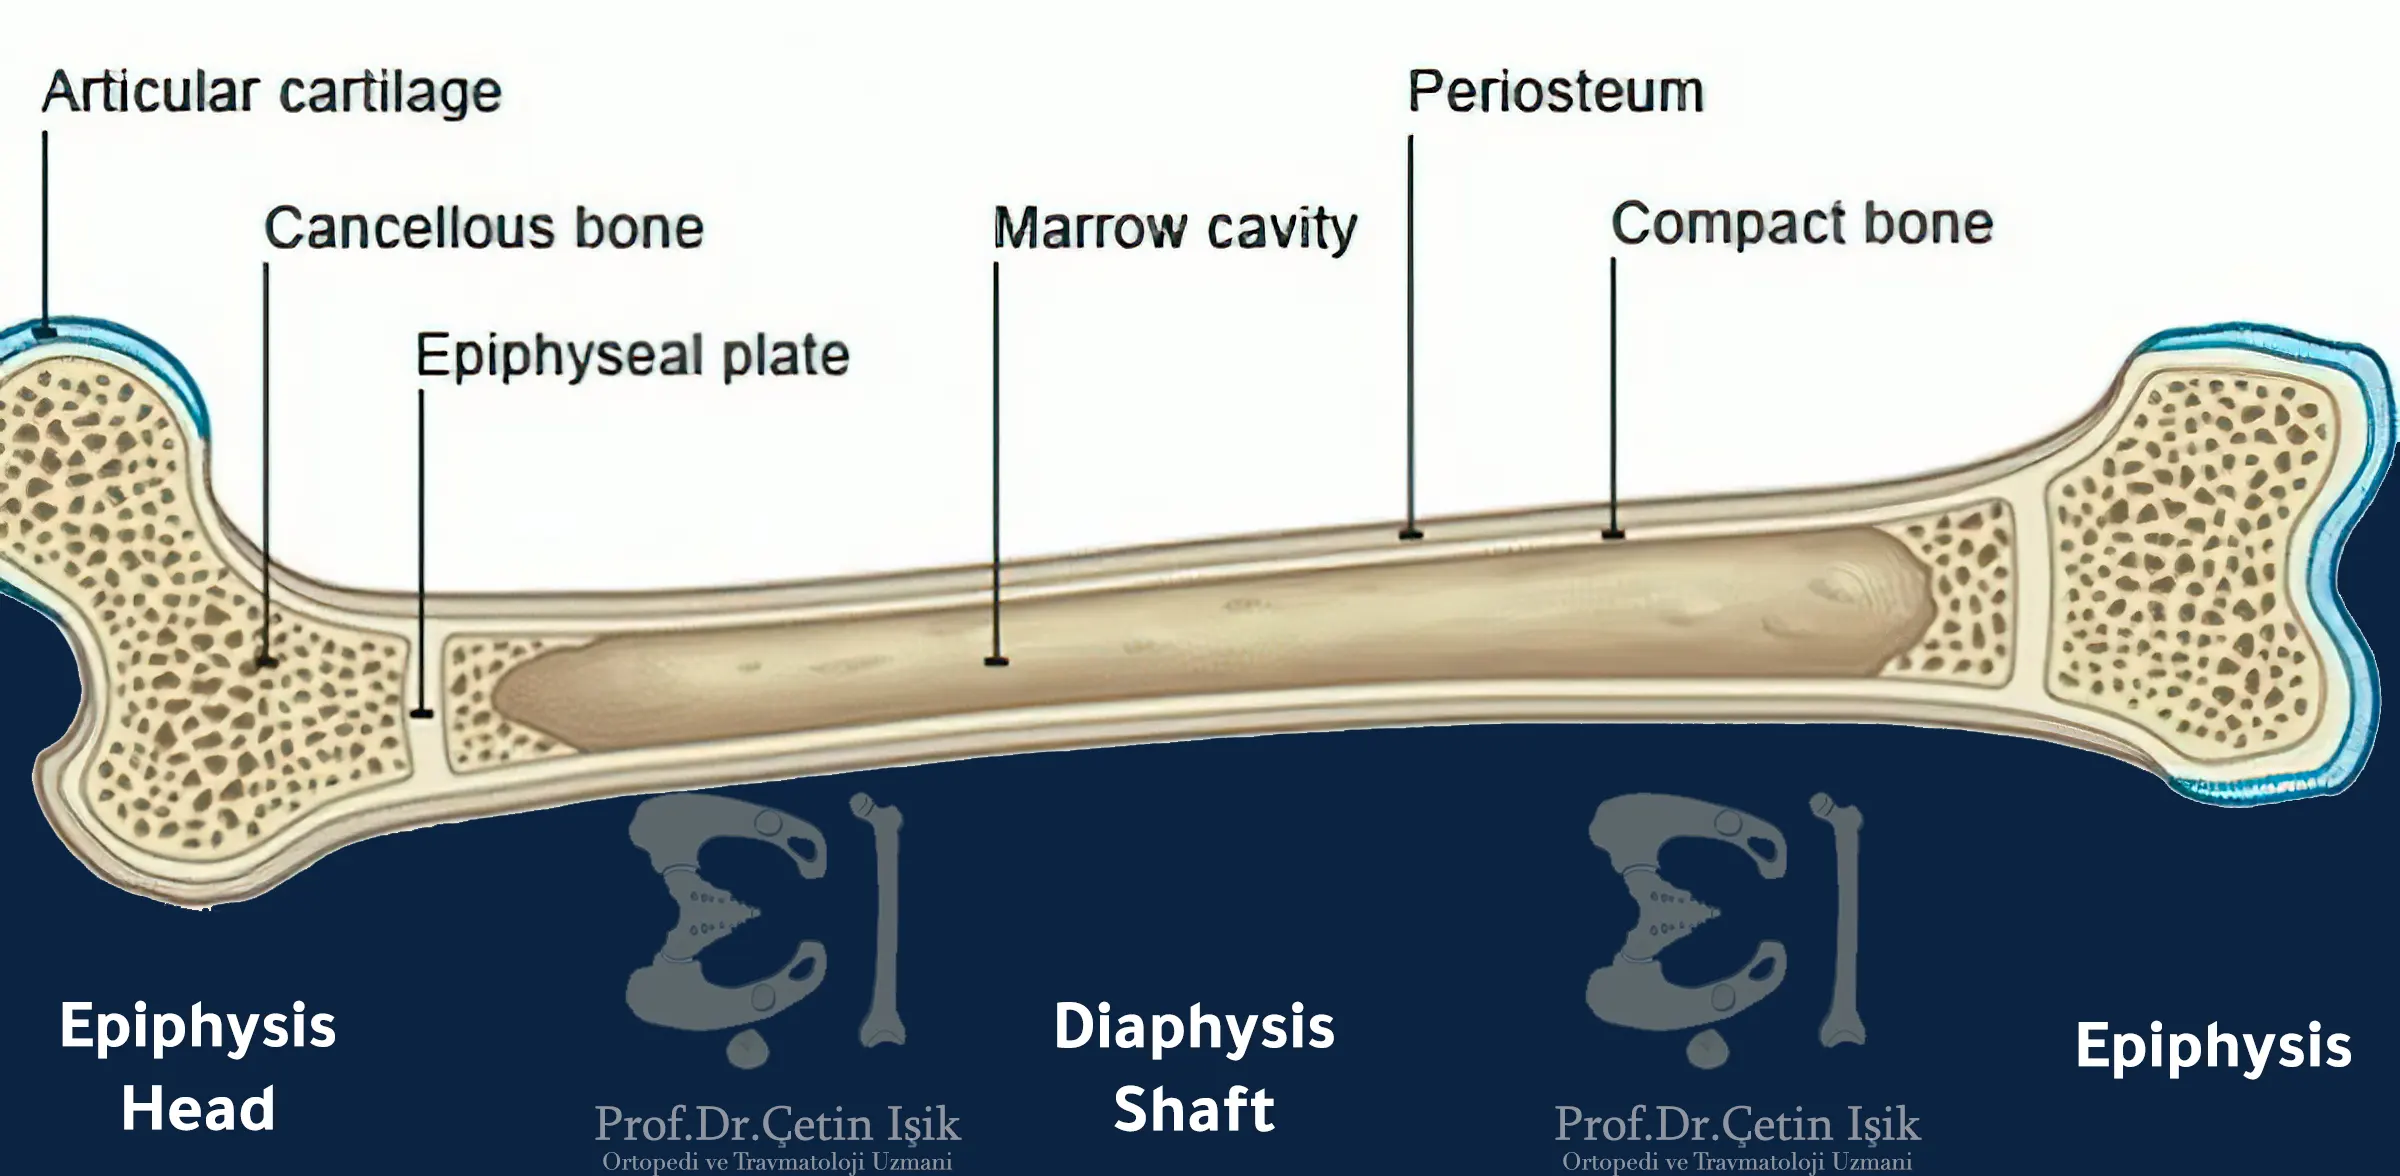 An image showing the normal bone structure